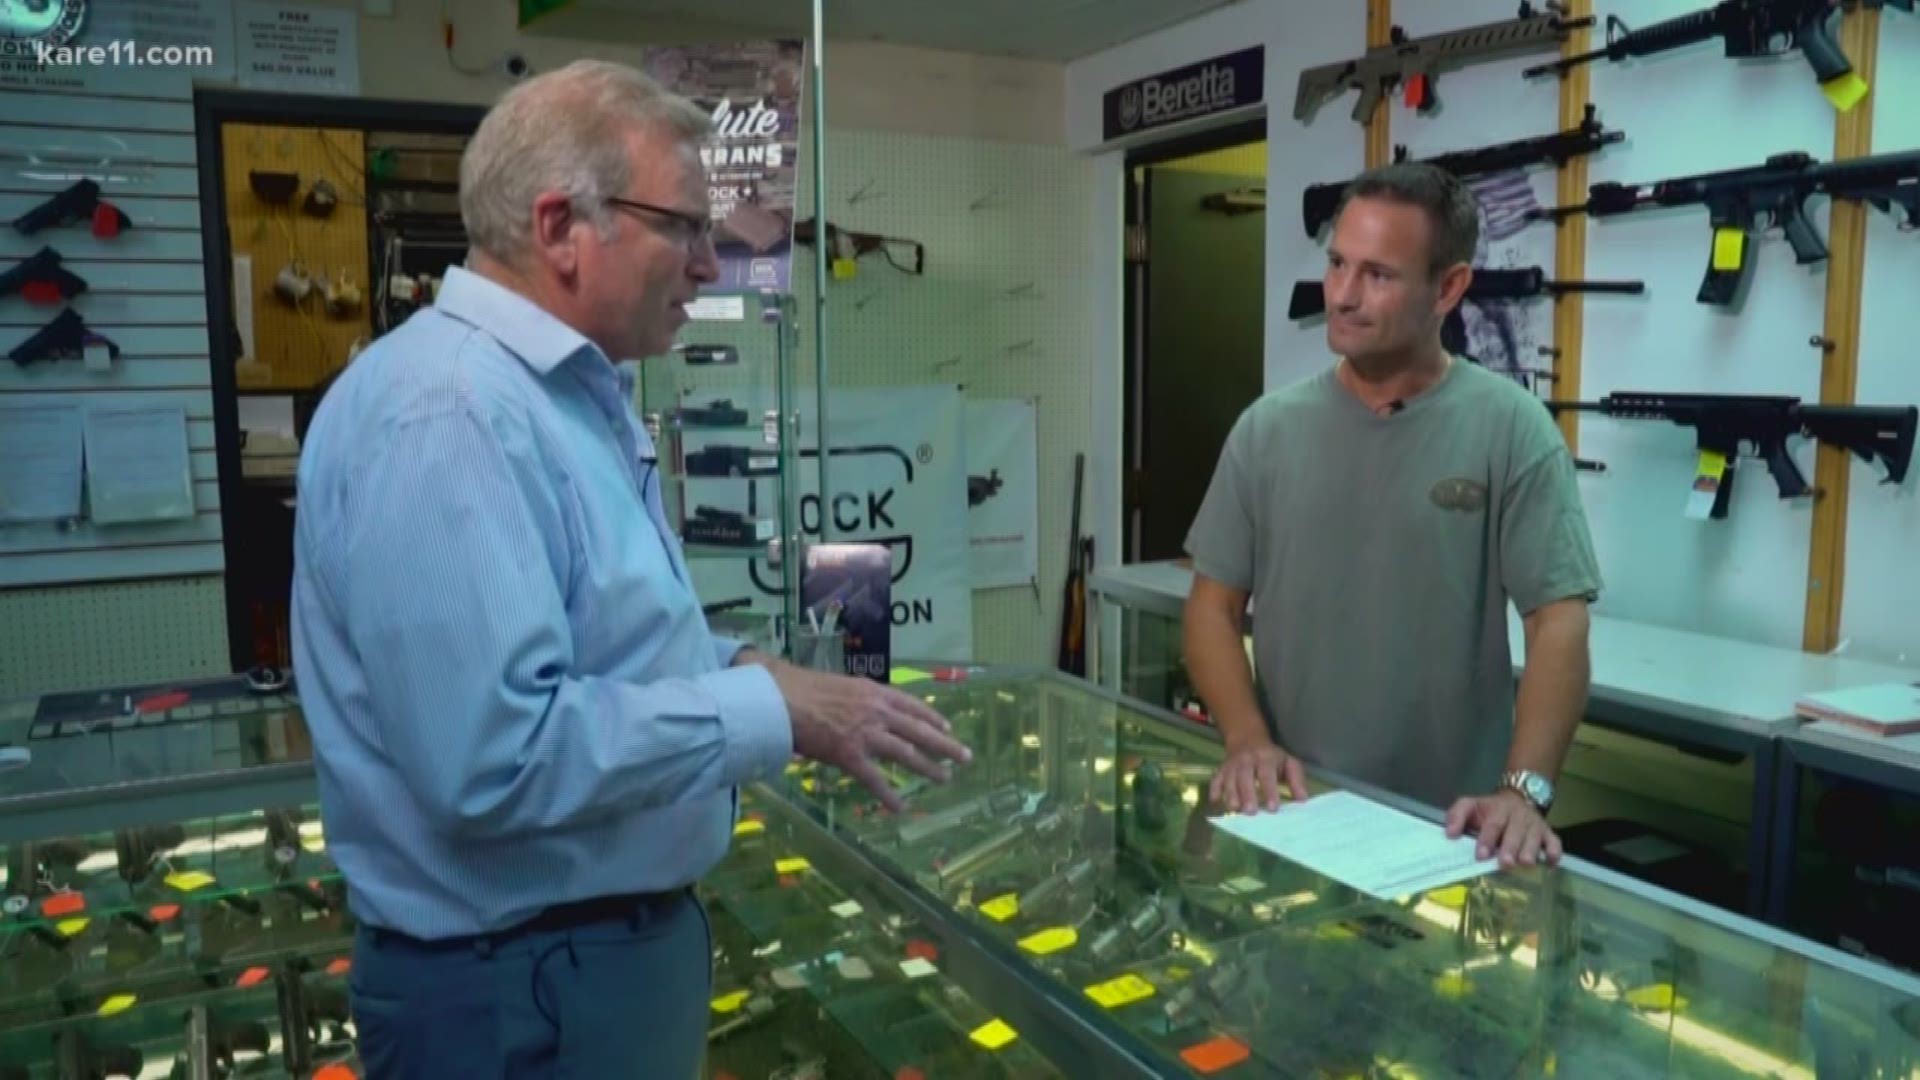 Lawmakers face growing pressure to expand background checks to private gun transactions. We visit a local gun shop to learn how those checks work.